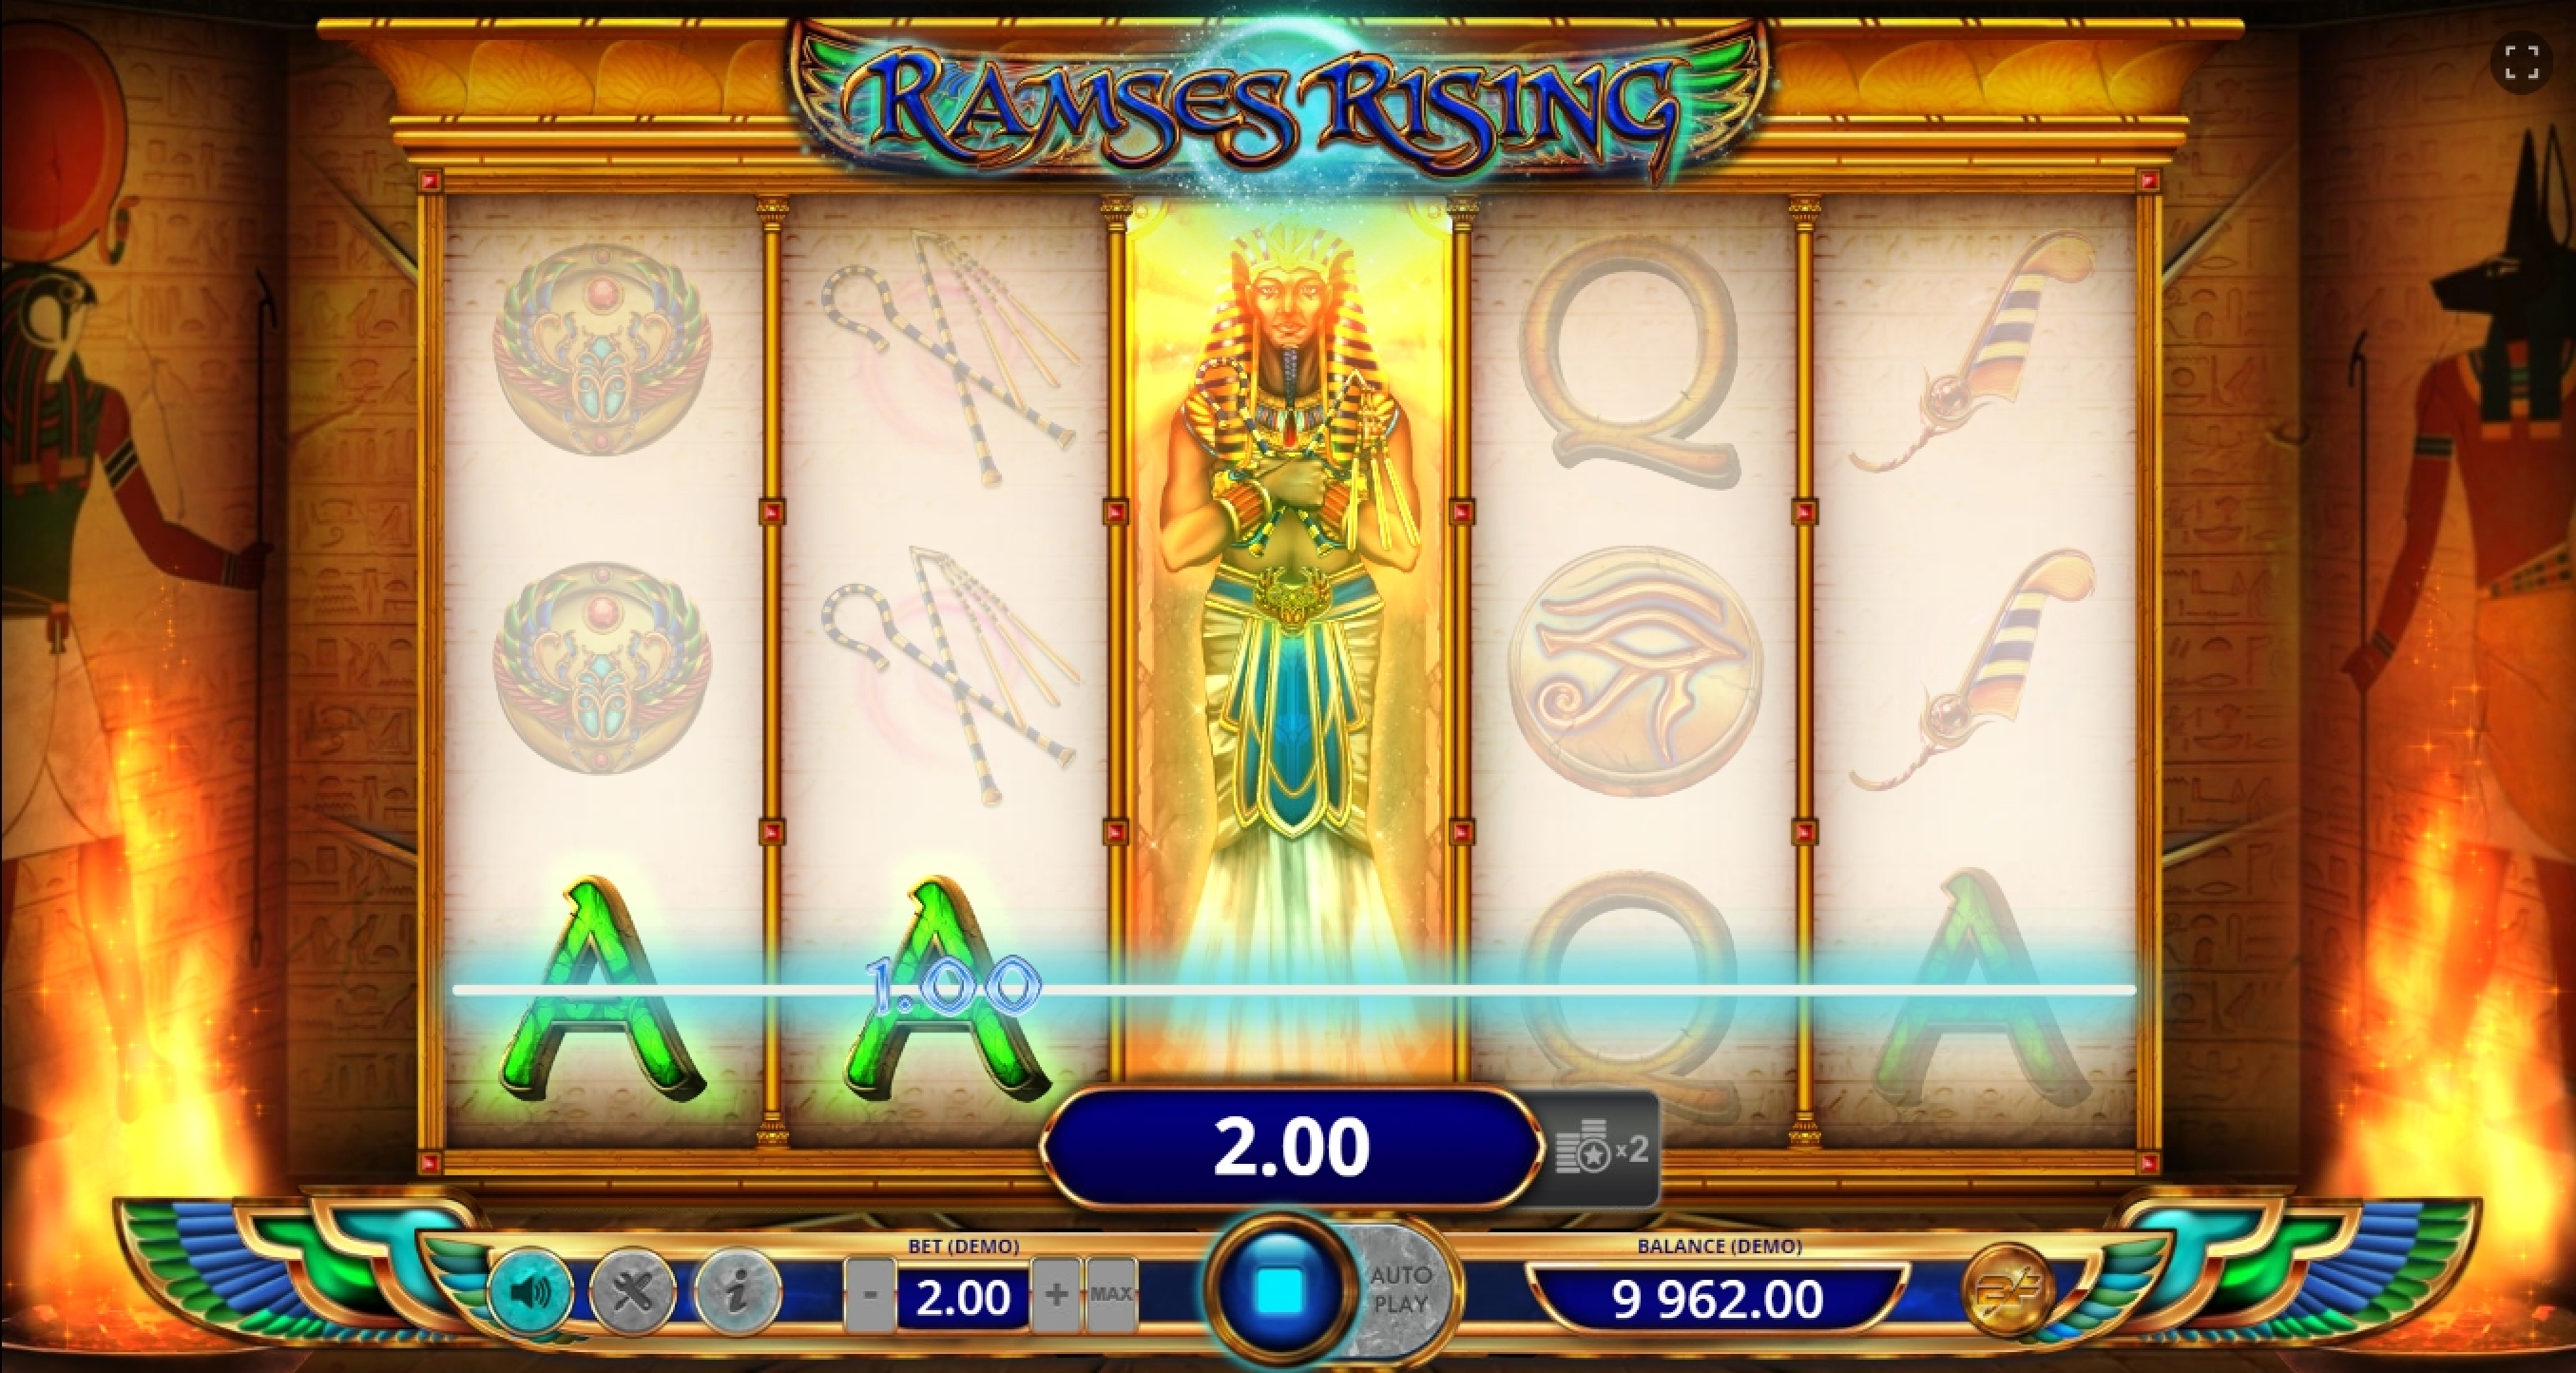 Win Money in Ramses Rising Free Slot Game by BF Games